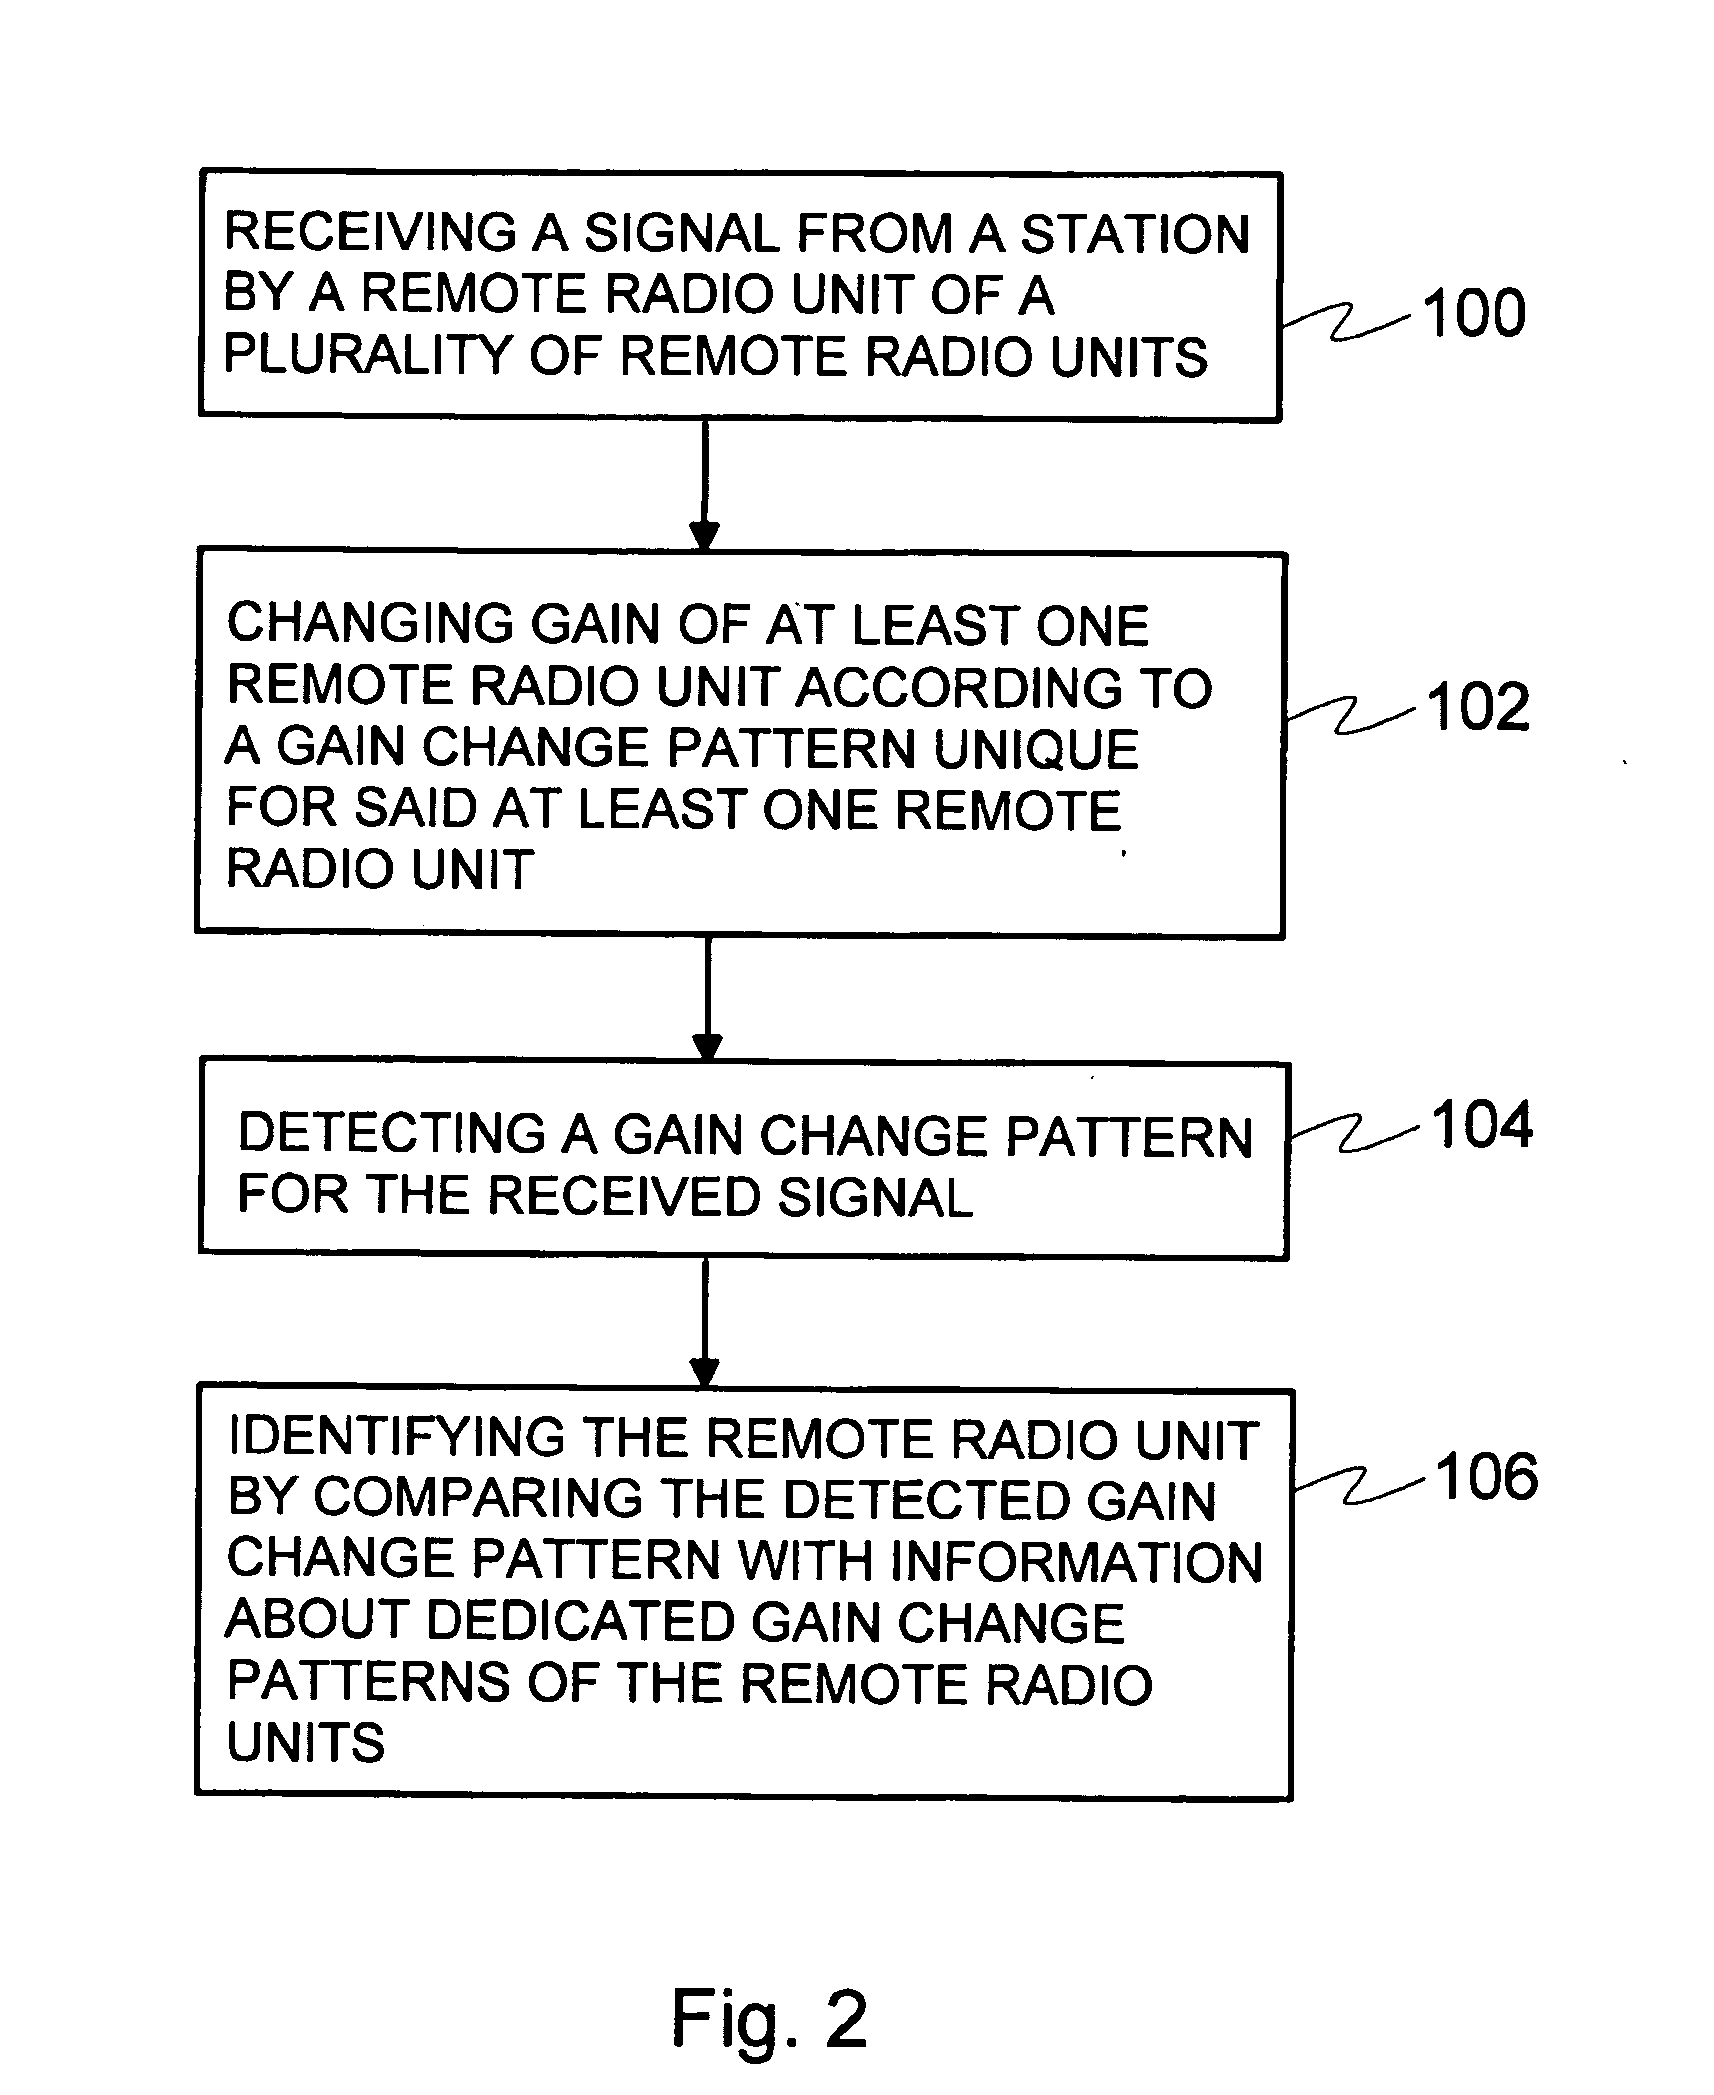 Identifying remote radio units in a communication system